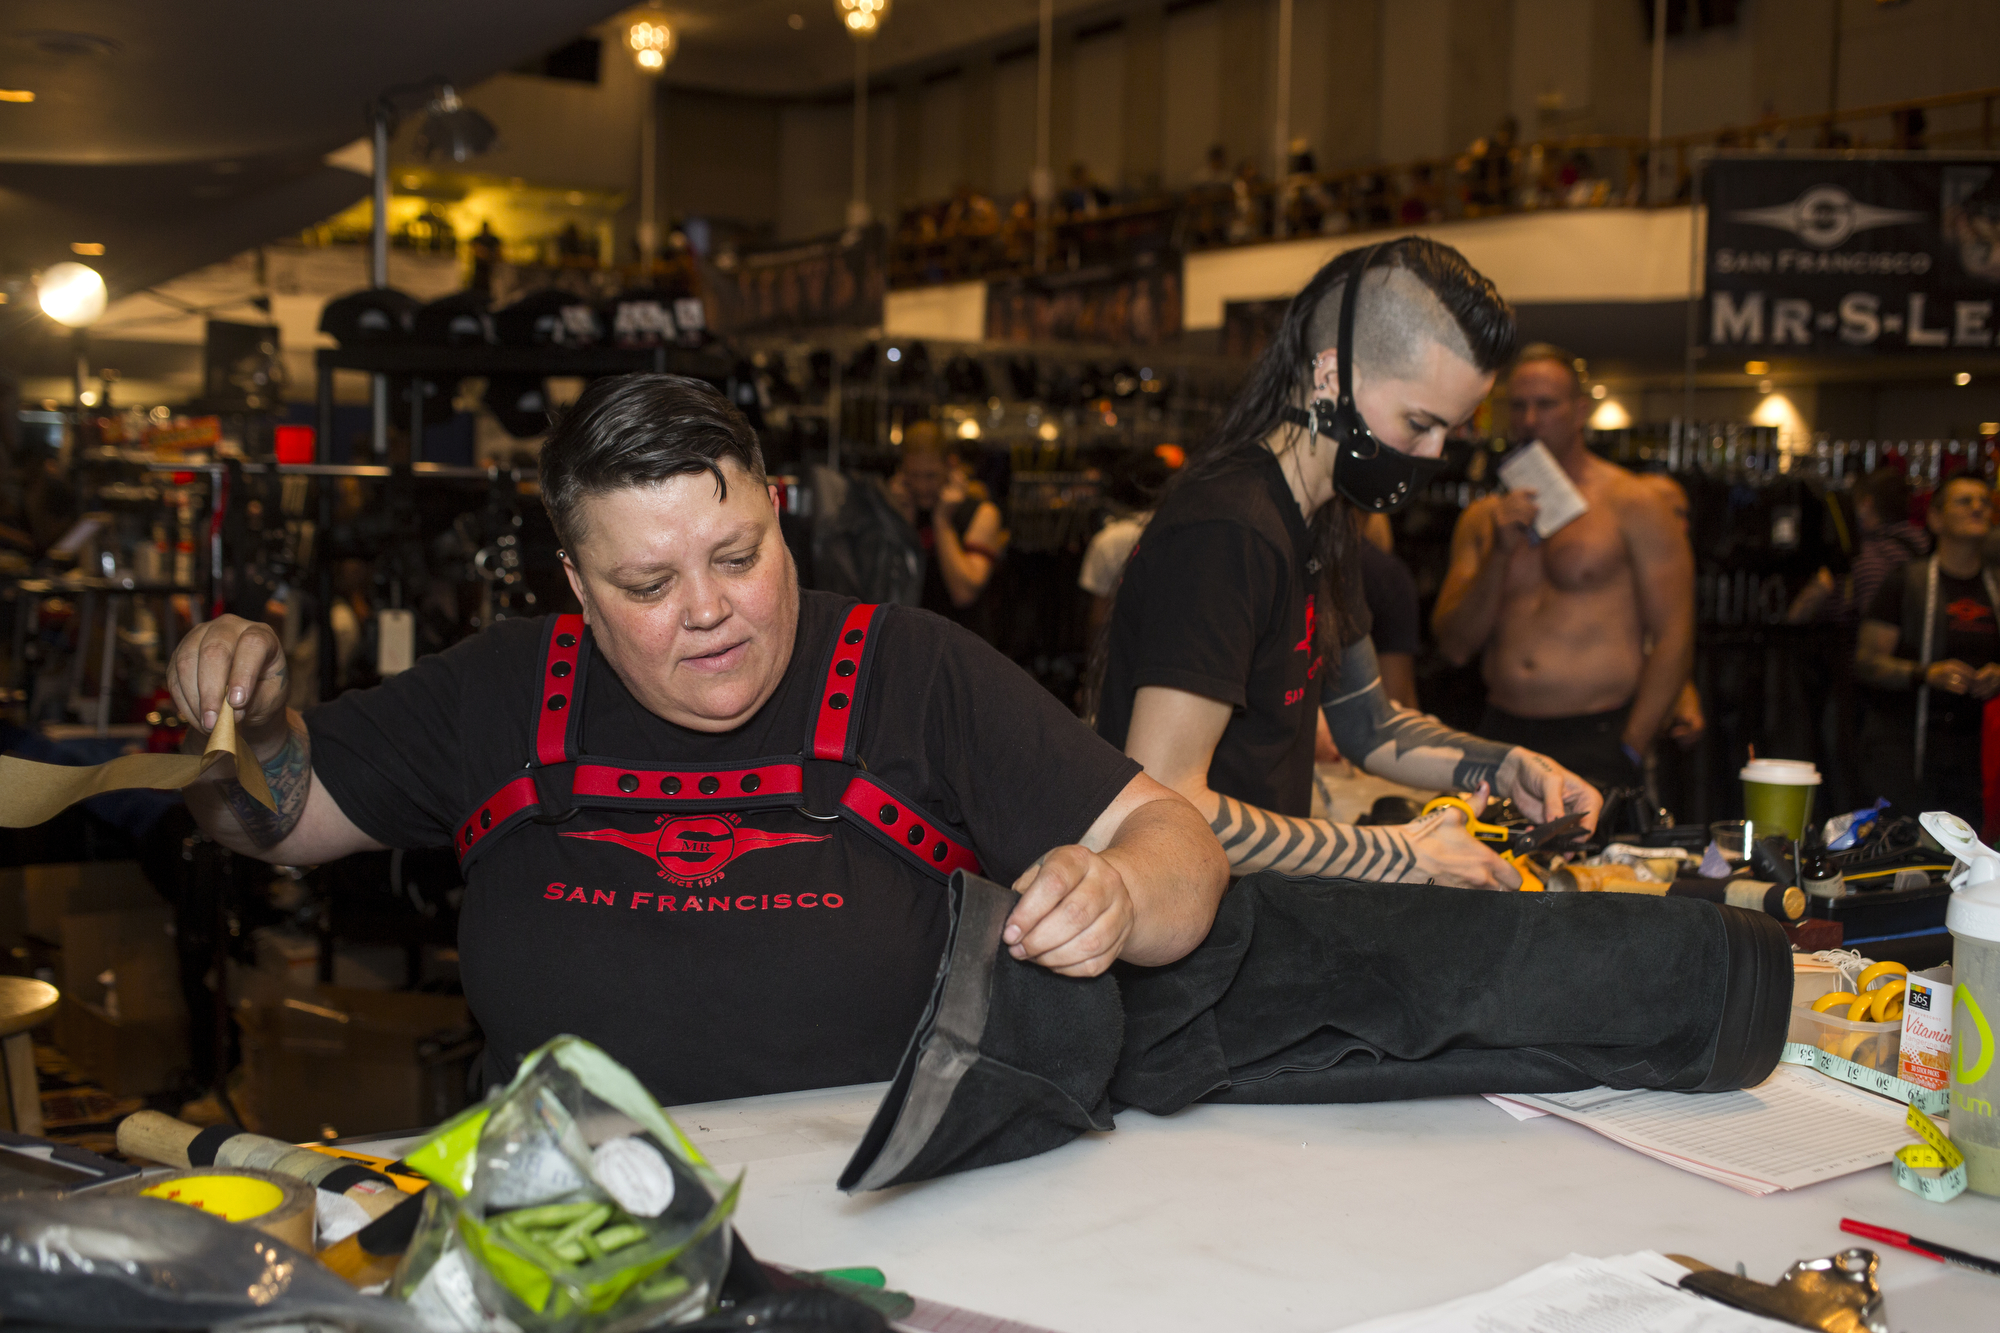  Skuwish, center, and Jackzon, right, work at the Mr S Leather booth in the gear market, hemming and adjusting just purchased leather wear. The Mr S Leather company also donates the winners' sash for The 40th Annual International Mister Leather Compe